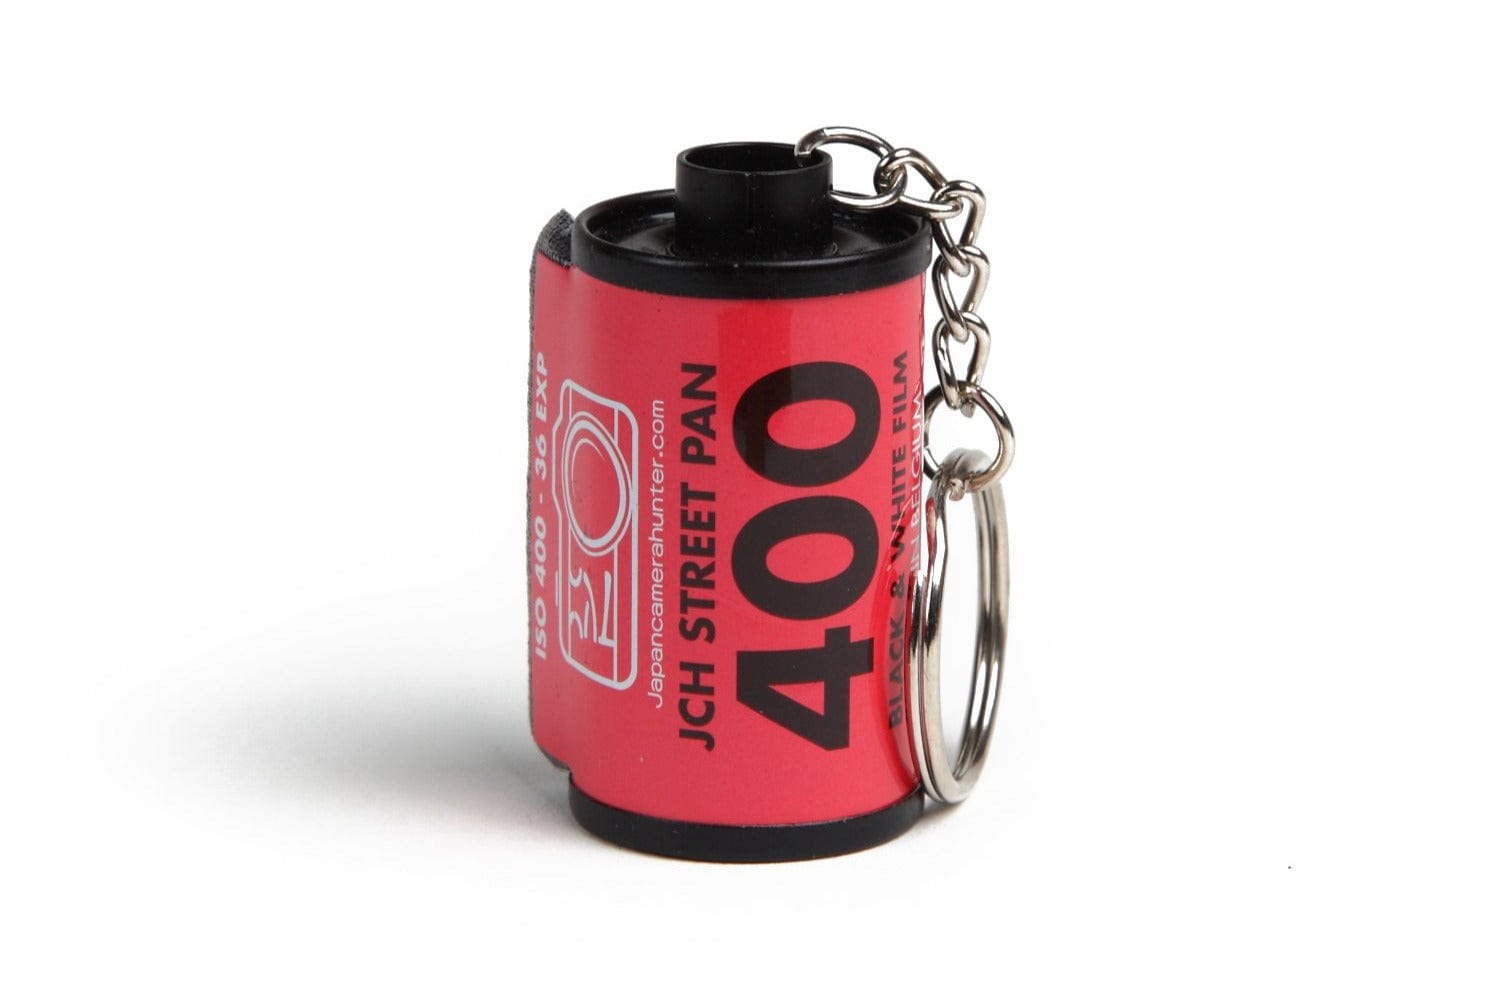 Retro Photo Reading 35mm Film Canister Keychain Kodacolor 200